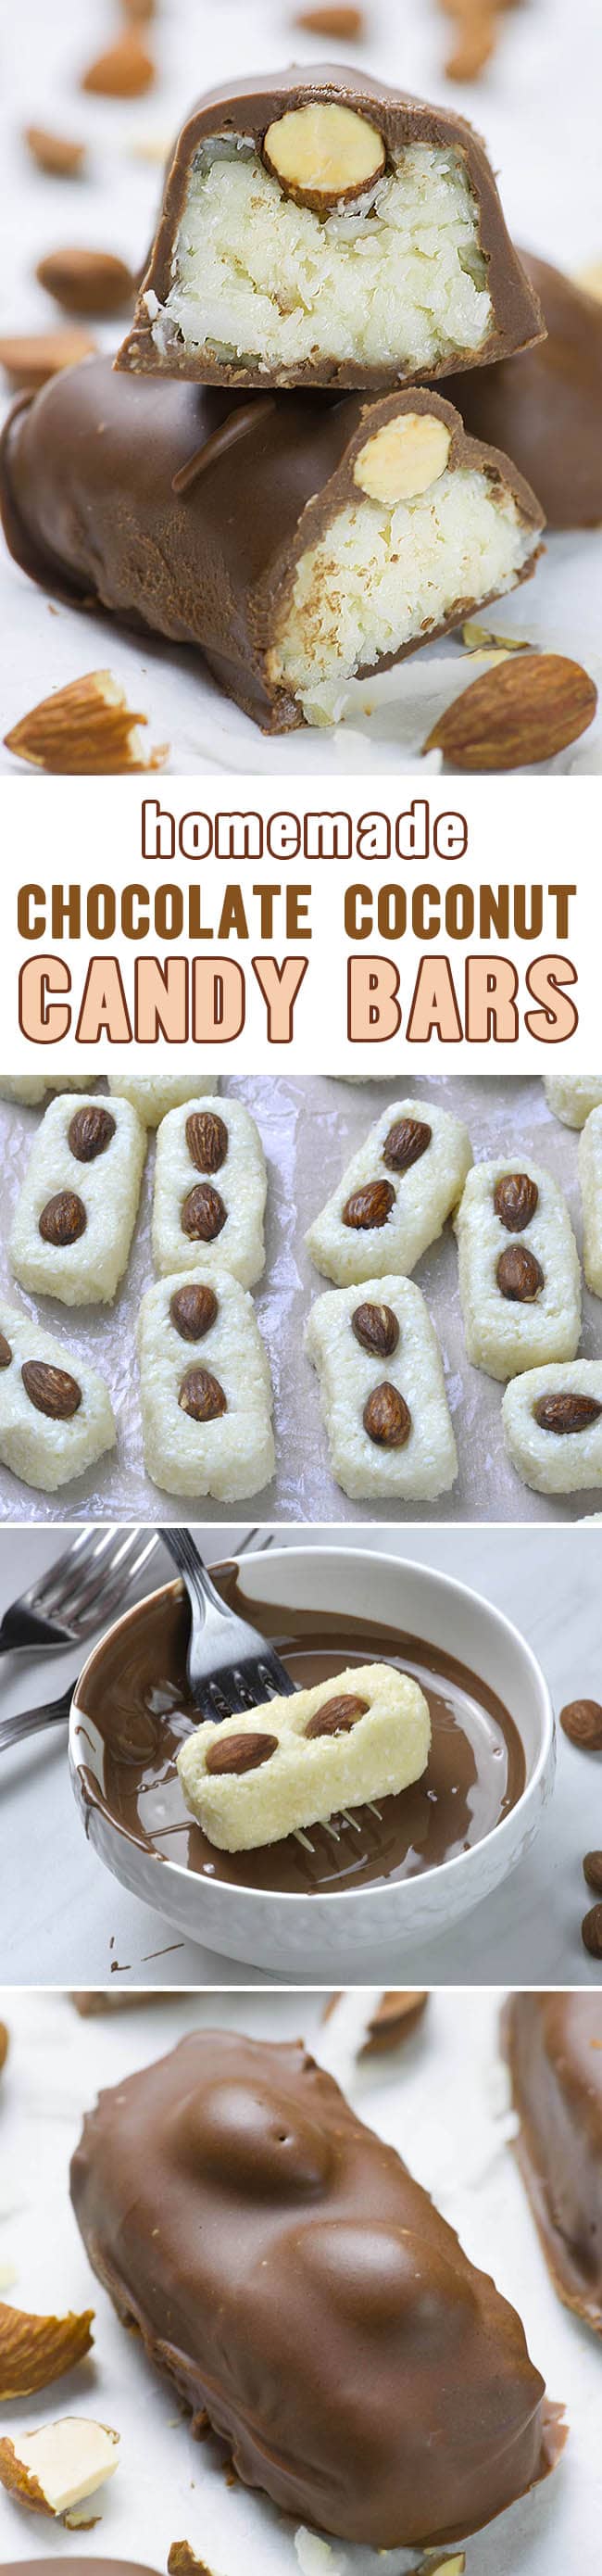 Quick and easy no bake dessert with 4 ingredients - Homemade Chocolate Coconut Candy Bars !!! This is the best sweet treat I’ve ever tried and the recipe is so simple and easy to make!!! It’s delicious snack for kids and perfect dessert for parties.